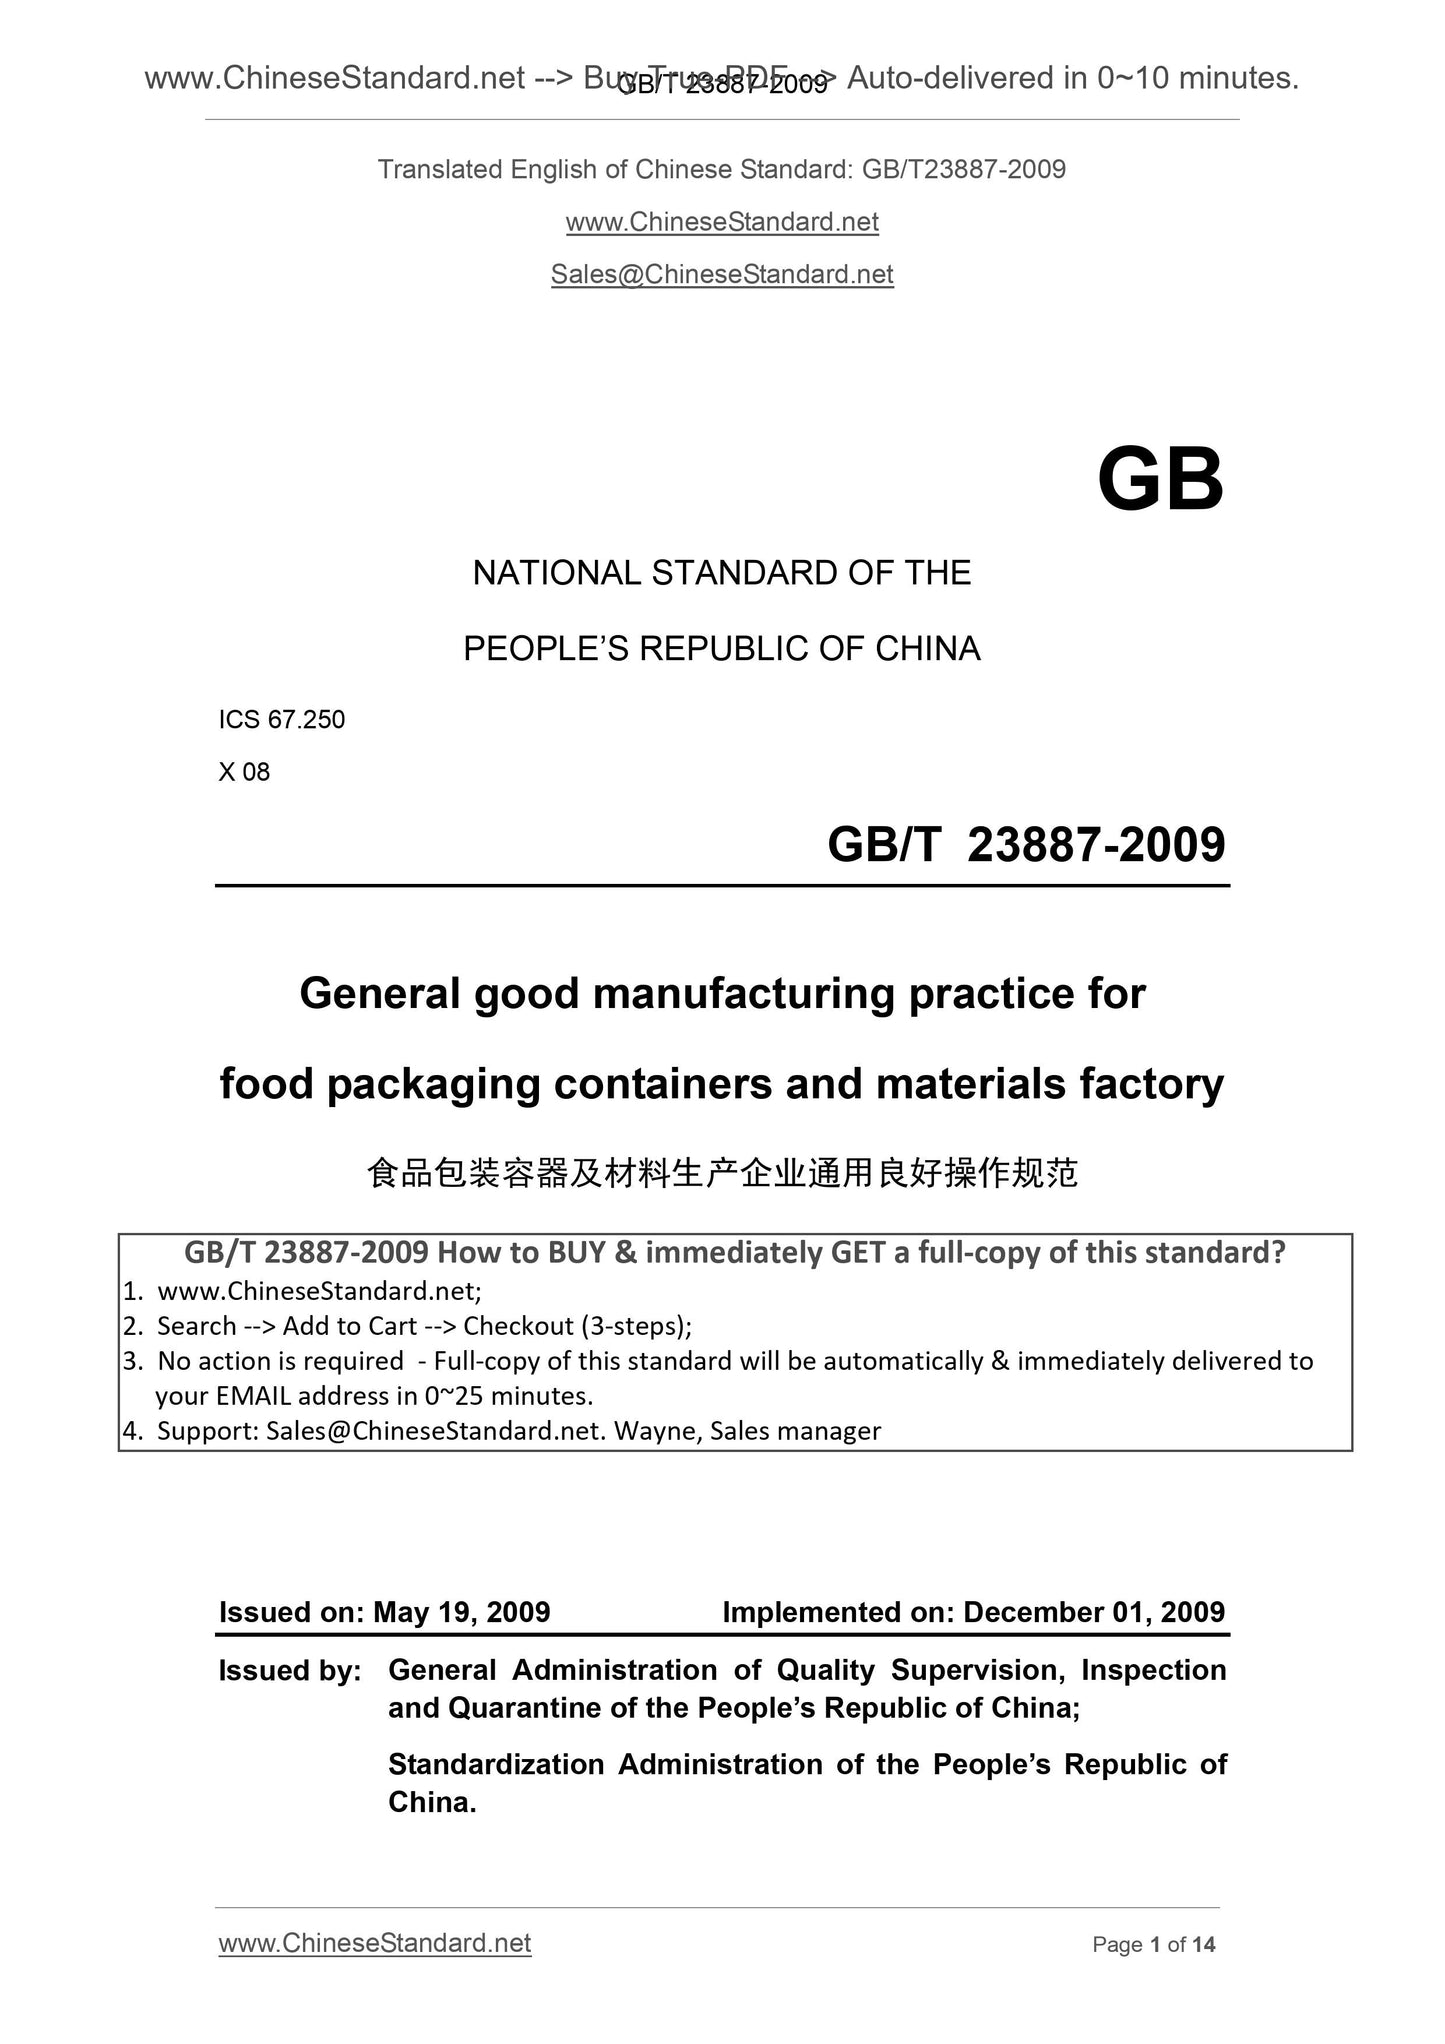 GB/T 23887-2009 Page 1